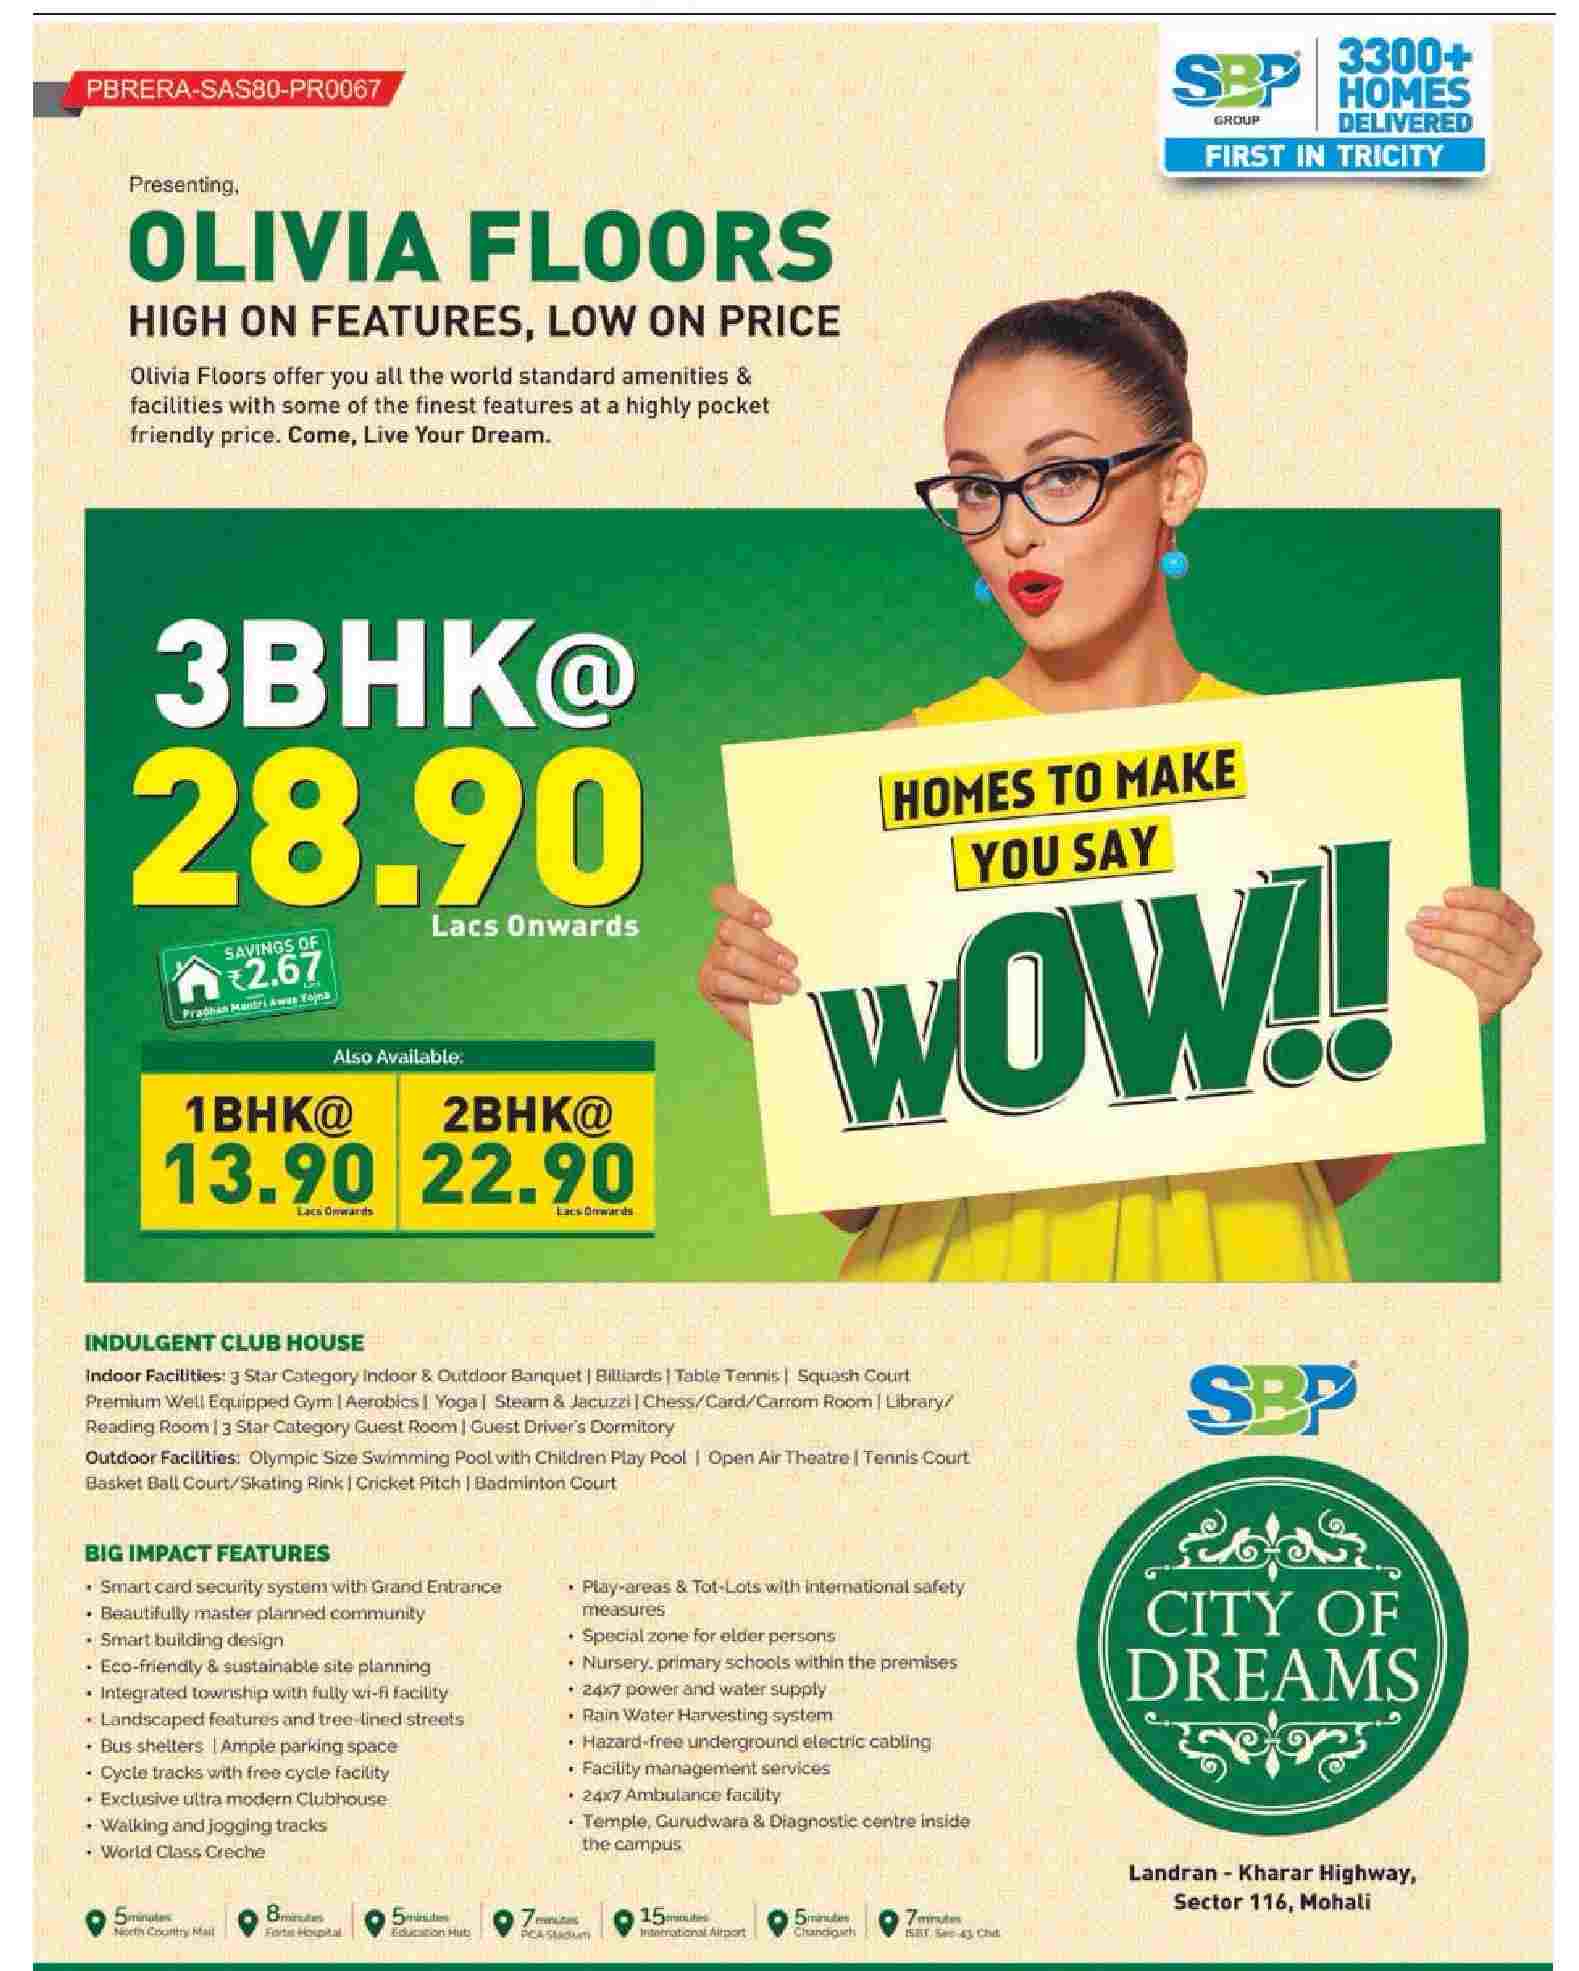 SBP presenting Olivia Floors with high features and low price at City Of dreams in Mohali